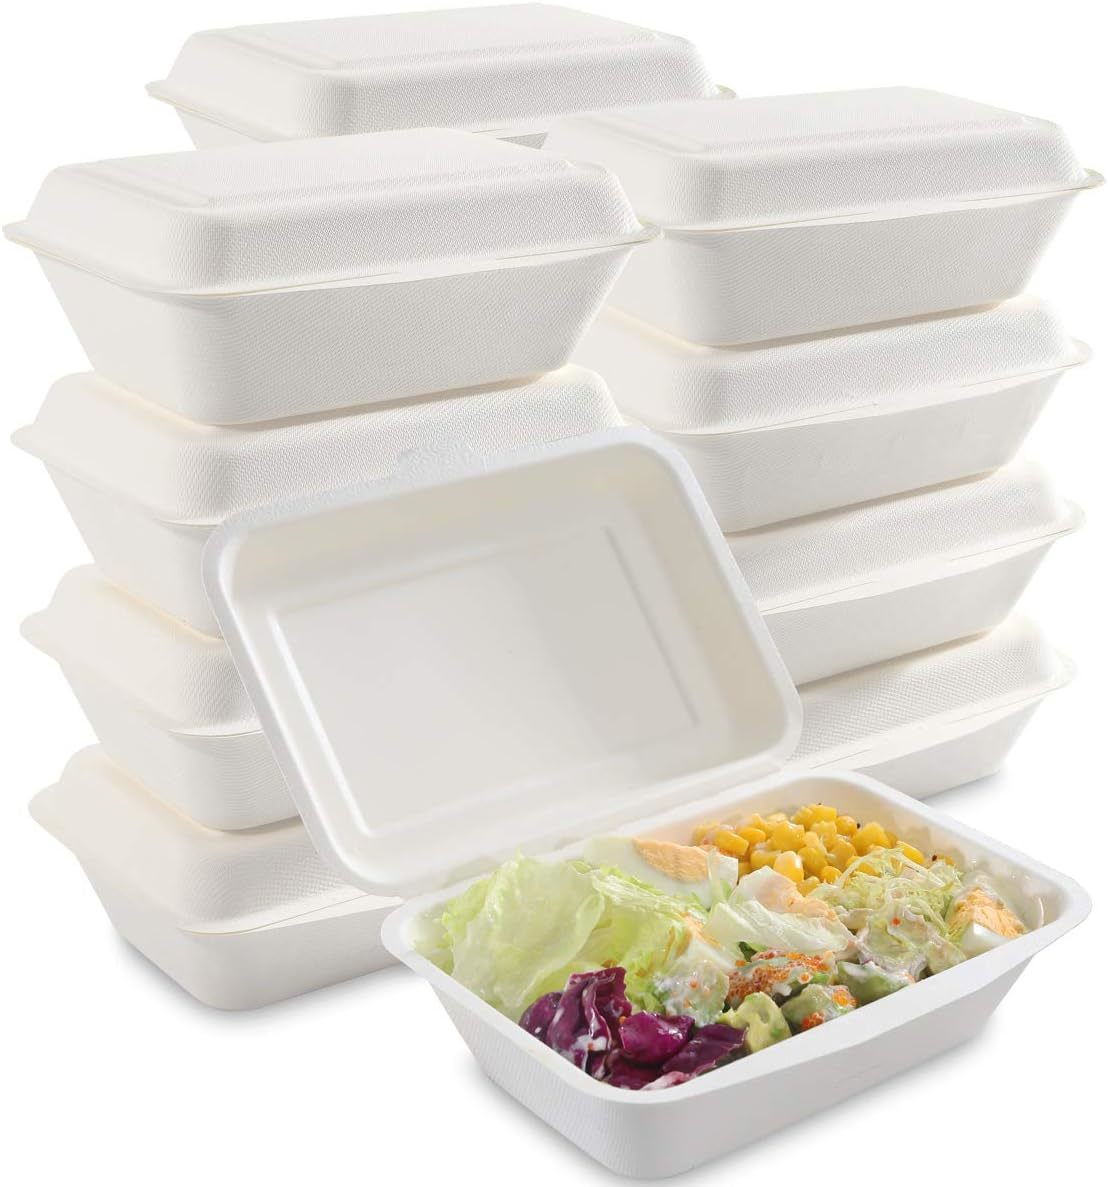 Montopack Disposable Takeout Pans with Clear Lids 50 pack 5 x 4 2lb Tins